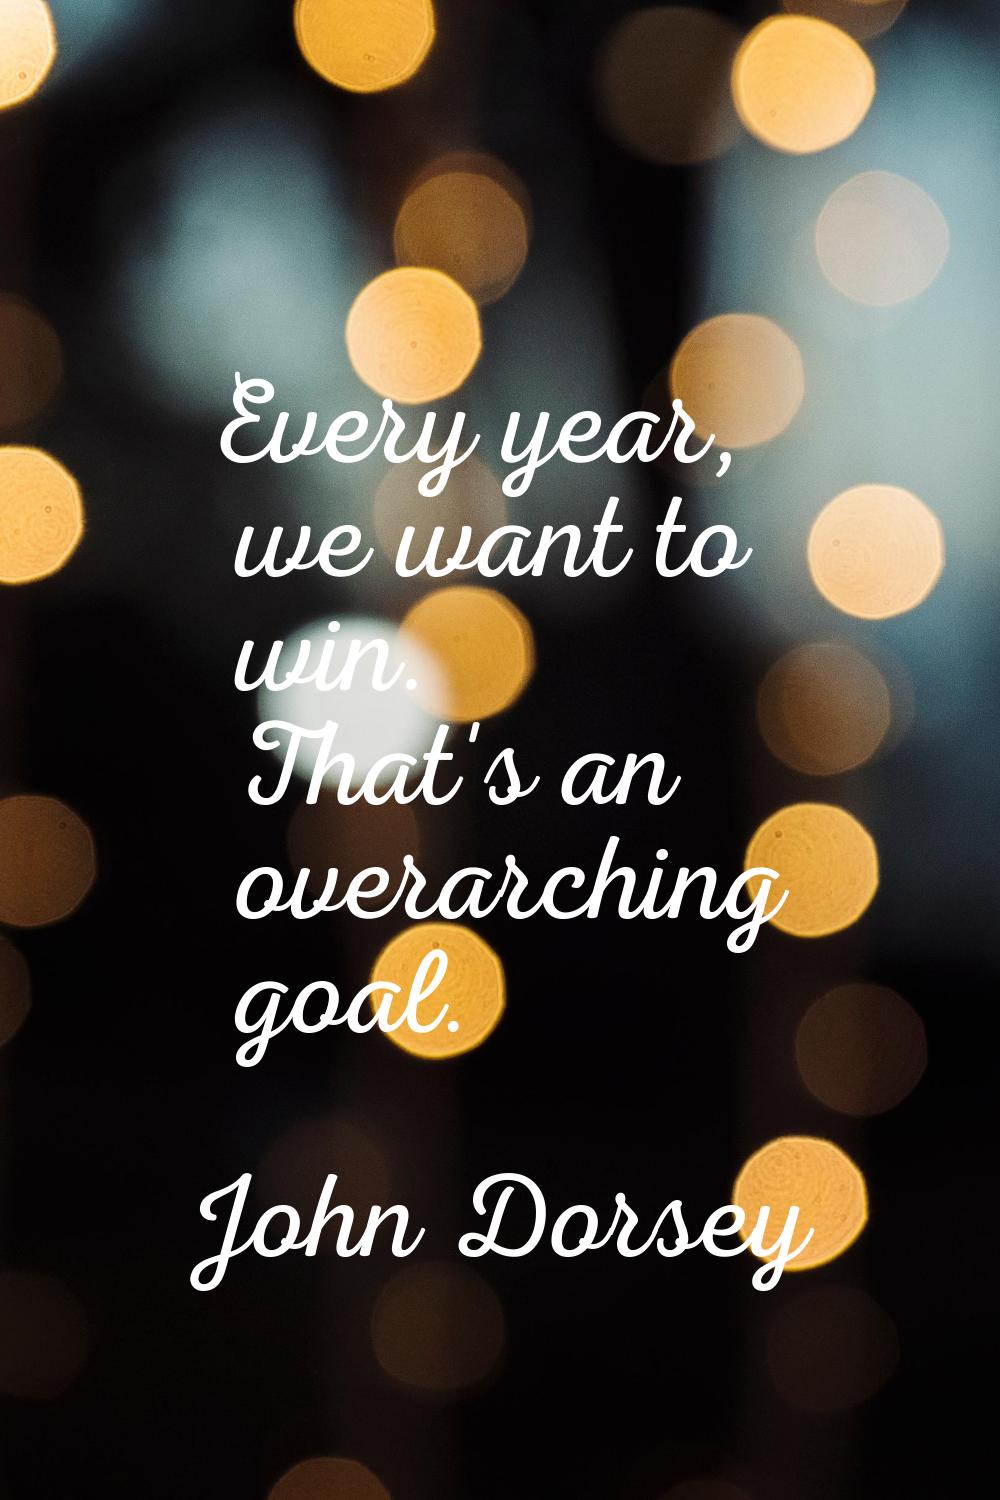 Every year, we want to win. That's an overarching goal.